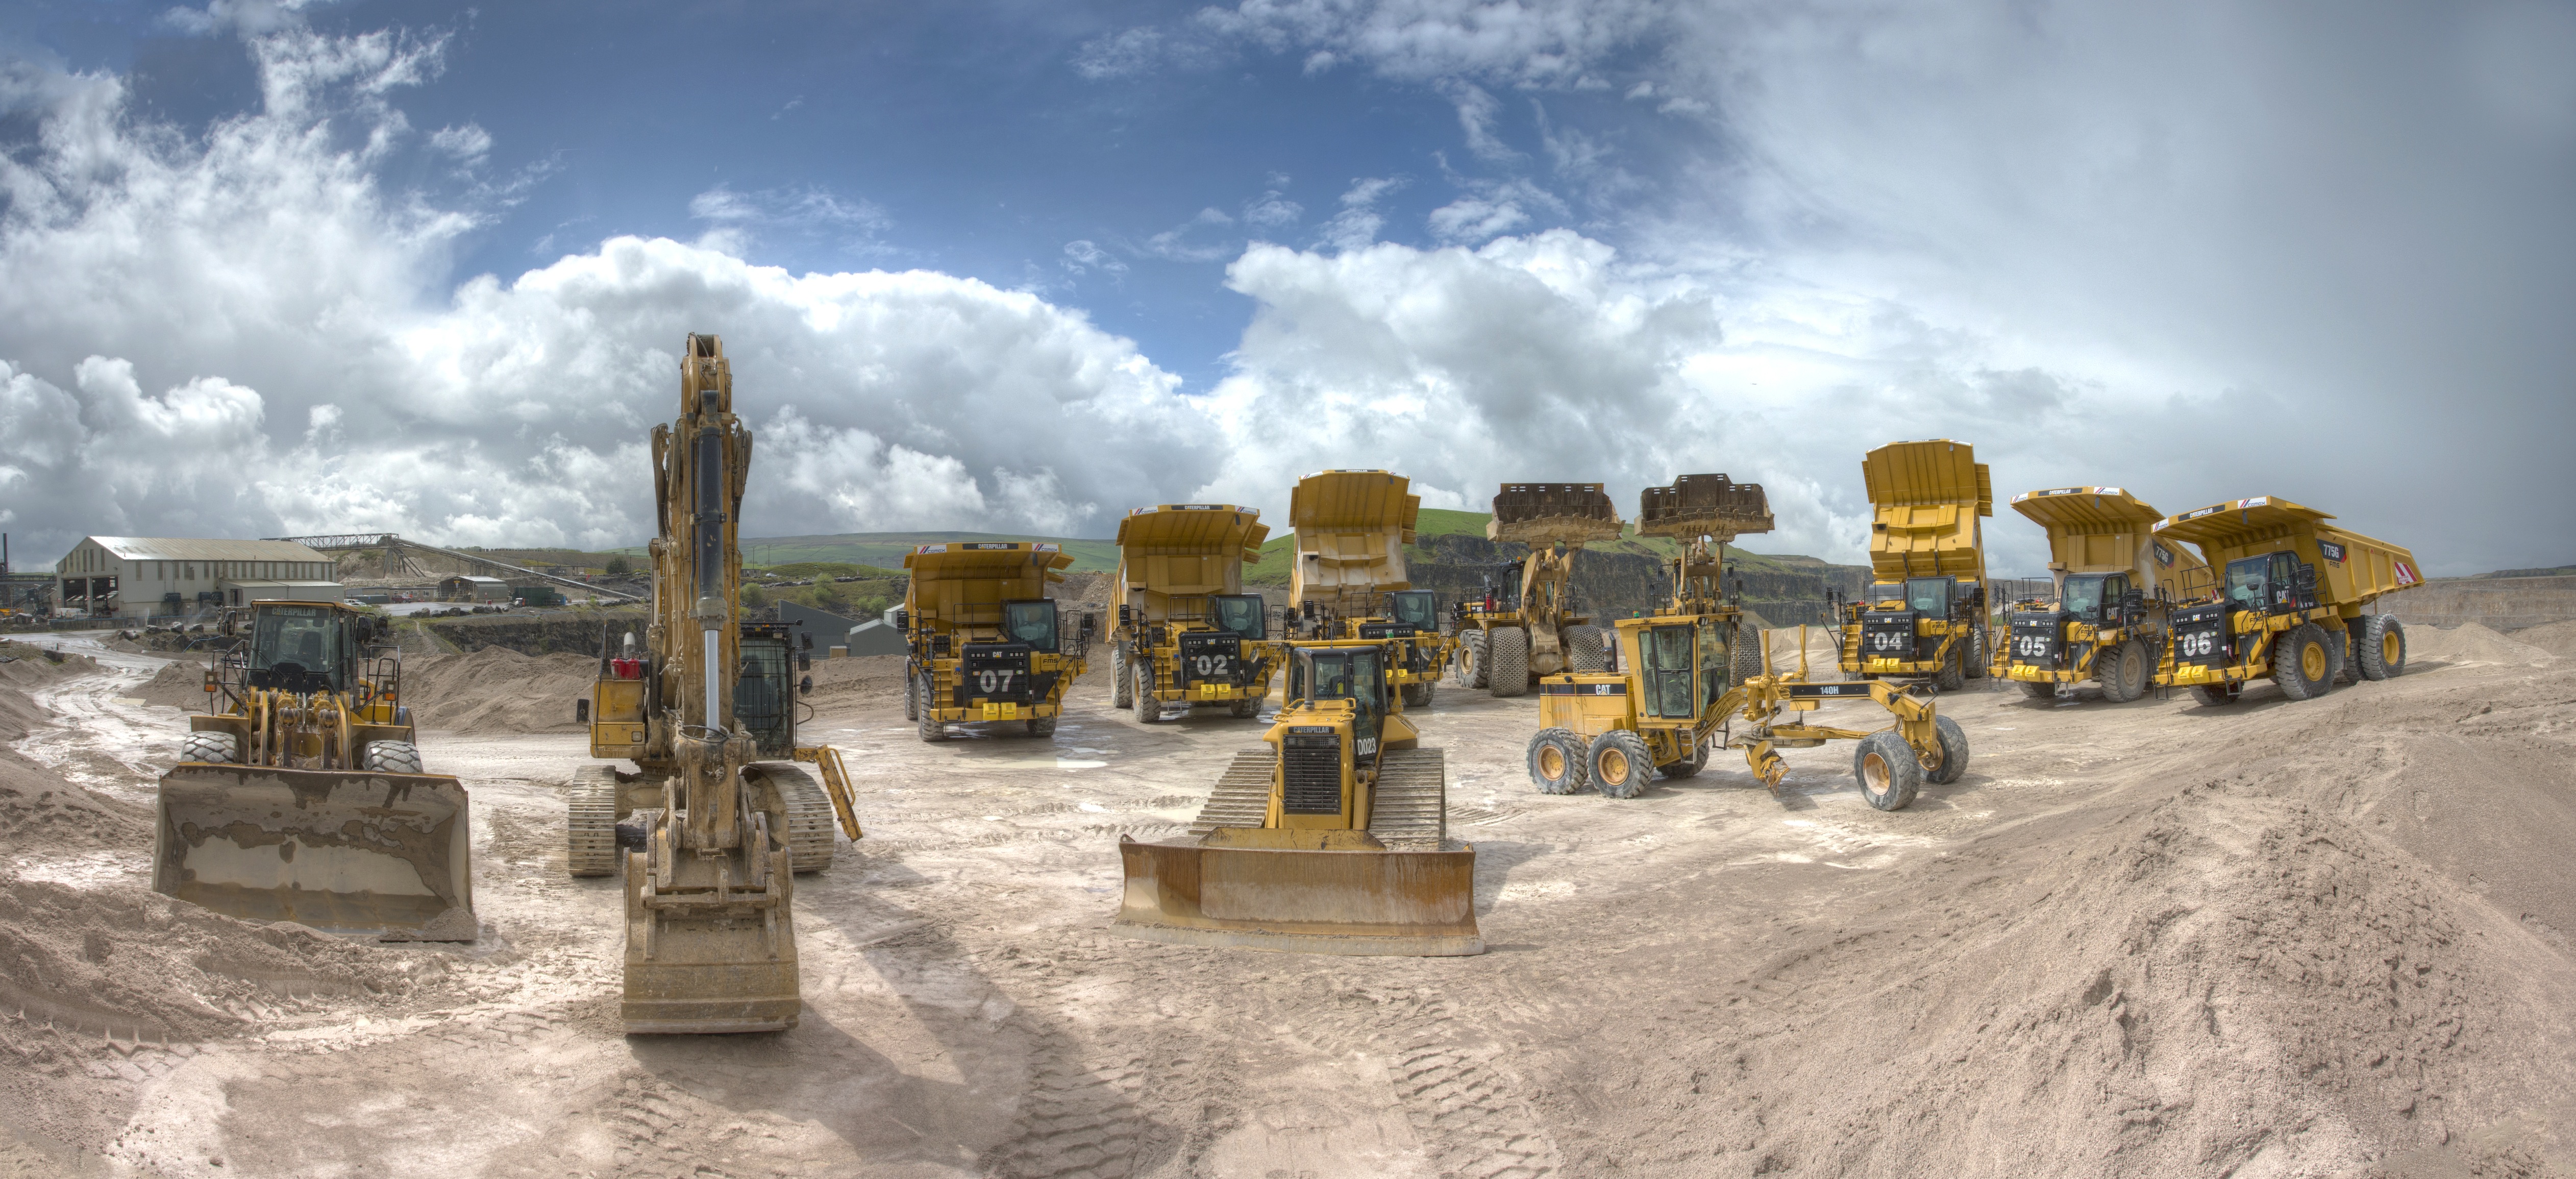 Finning at the Dove Holes limestone quarry